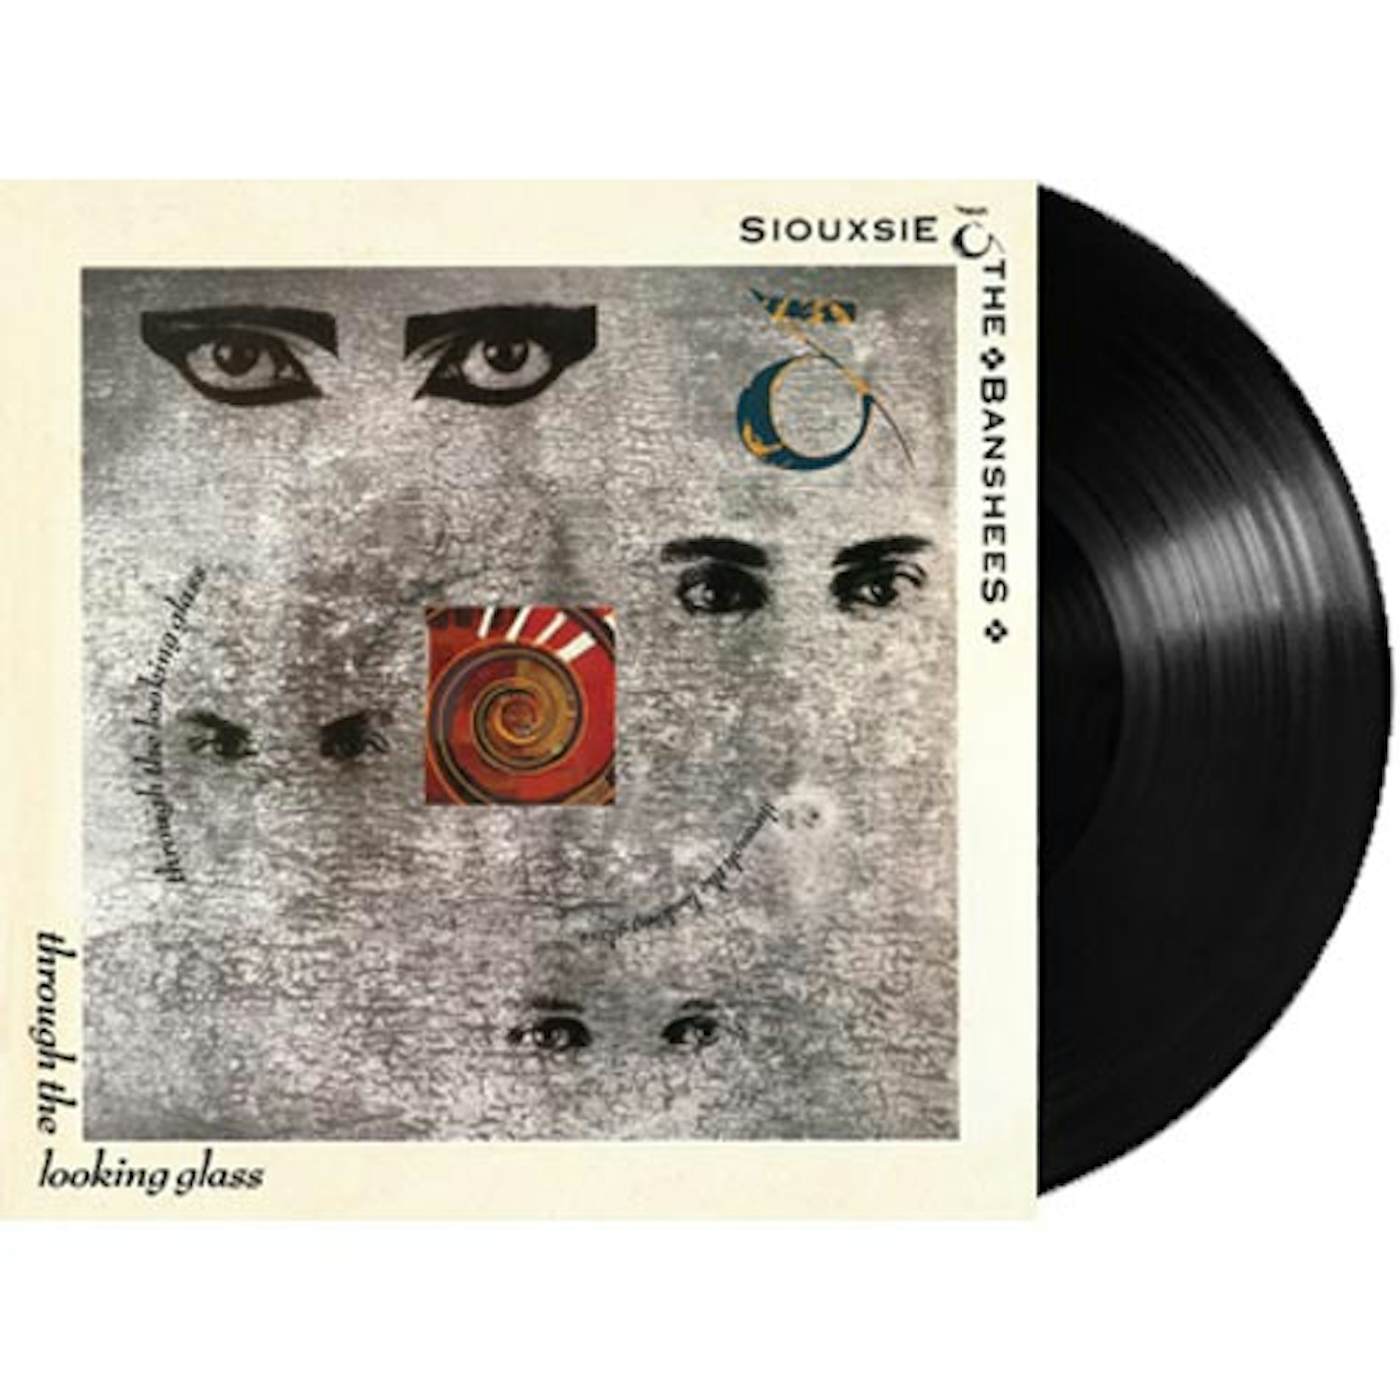 Siouxsie and the Banshees Through The Looking Glass Vinyl Record